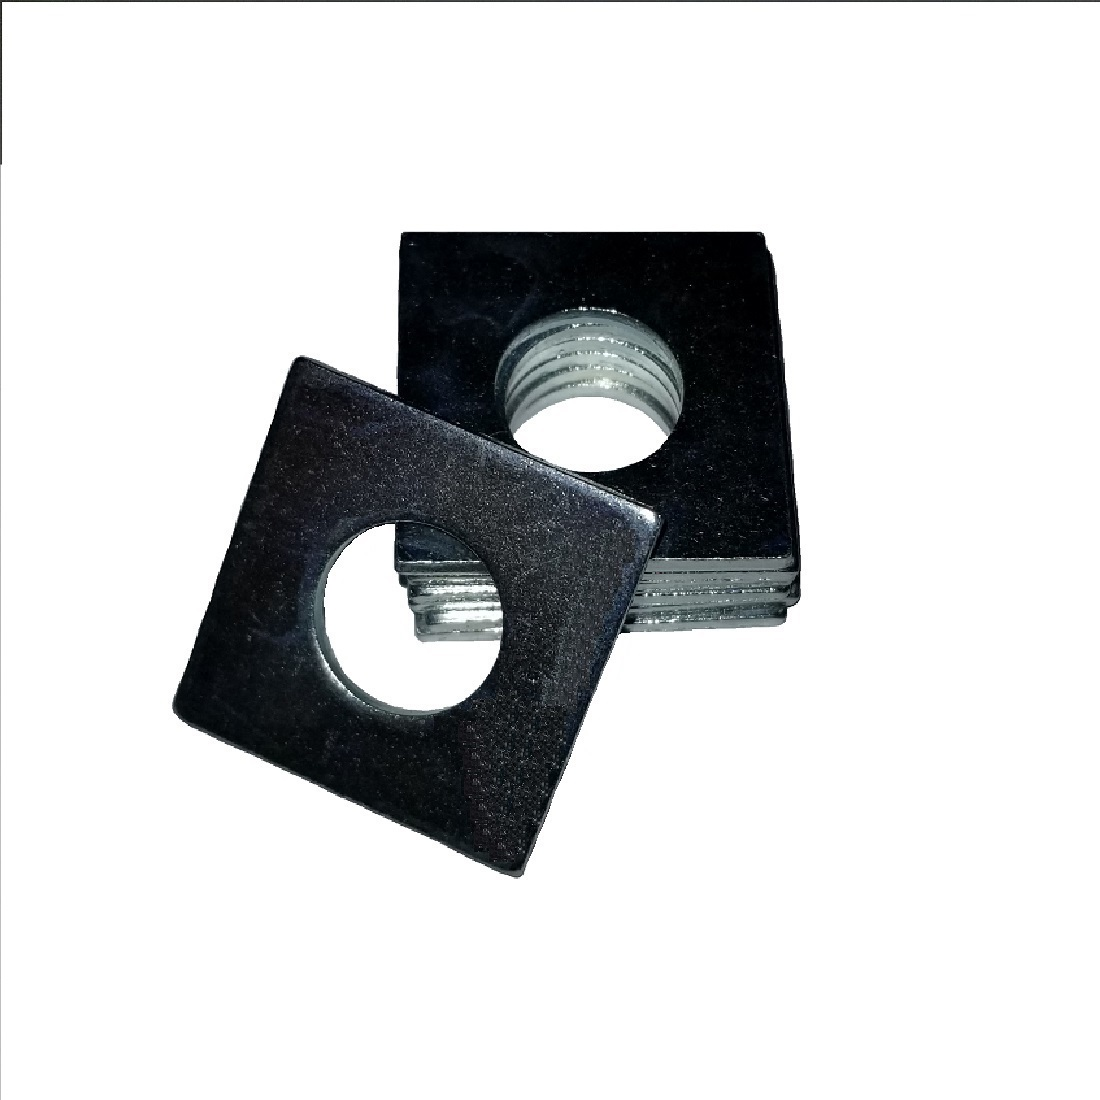 Square OD Washer - 0.187 ID, 0.625 OD, 0.125 Thick, Aluminum